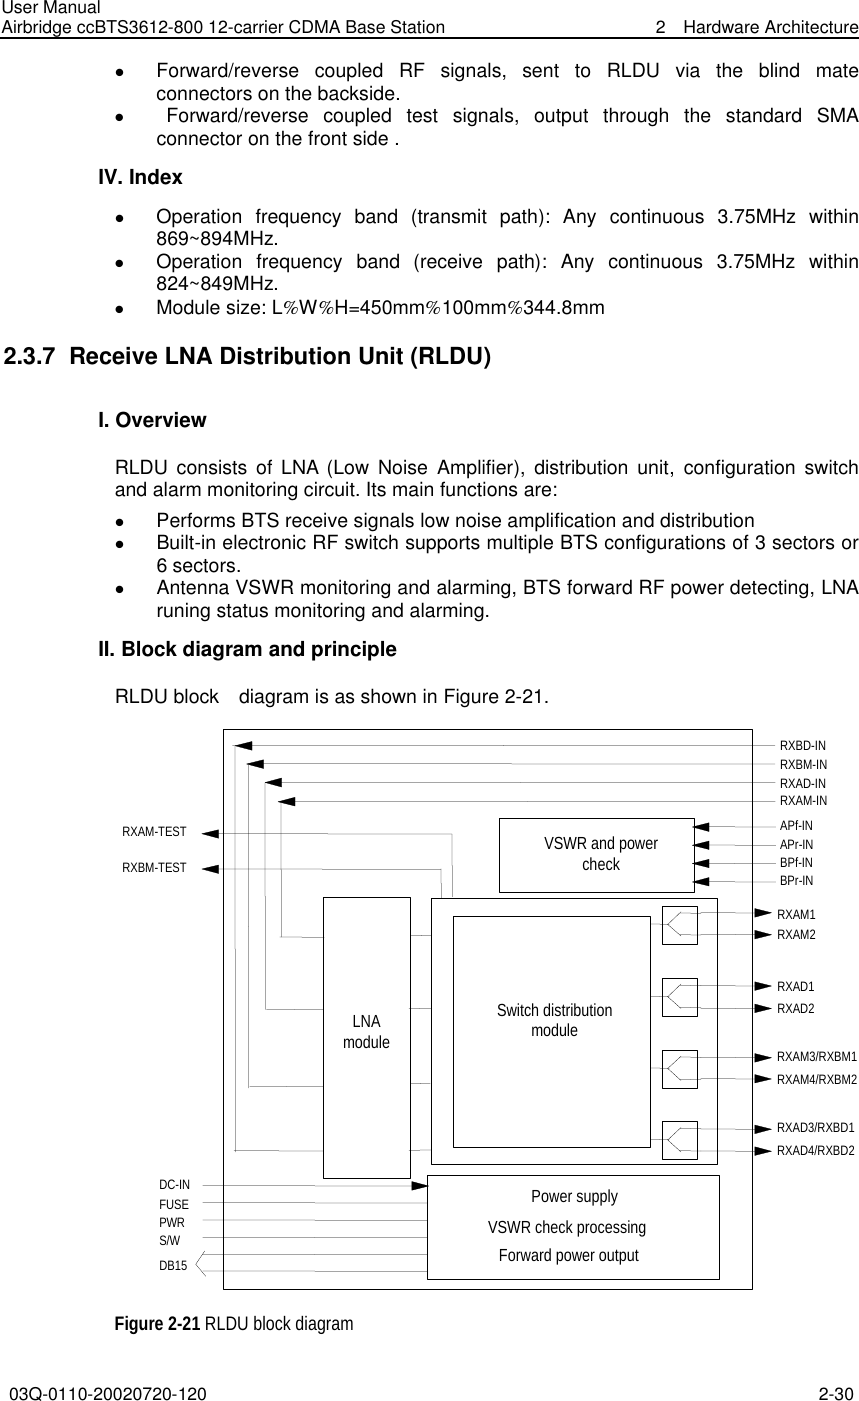 User Manual Airbridge ccBTS3612-800 12-carrier CDMA Base Station  2  Hardware Architecture 03Q-0110-20020720-120 2-30  l Forward/reverse coupled RF signals,  sent to RLDU via the blind mate connectors on the backside. l  Forward/reverse coupled test signals,  output through the standard SMA connector on the front side . IV. Index l Operation frequency band (transmit path):  Any continuous 3.75MHz within 869~894MHz. l Operation frequency band (receive path):  Any continuous 3.75MHz within 824~849MHz. l Module size: L%W%H=450mm%100mm%344.8mm 2.3.7  Receive LNA Distribution Unit (RLDU) I. Overview RLDU consists of LNA (Low Noise Amplifier),  distribution unit,  configuration switch and alarm monitoring circuit. Its main functions are: l Performs BTS receive signals low noise amplification and distribution l Built-in electronic RF switch supports multiple BTS configurations of 3 sectors or 6 sectors. l Antenna VSWR monitoring and alarming, BTS forward RF power detecting, LNA runing status monitoring and alarming.   II. Block diagram and principle RLDU block  diagram is as shown in Figure 2-21.   VSWR check processingVSWR and powercheckLNAmoduleSwitch distributionmoduleDC-INFUSEPWRS/WDB15RXAM-TESTRXBM-TESTRXBD-INRXBM-INRXAD-INRXAM-INAPf-INAPr-INBPf-INBPr-INRXAM1RXAM2RXAD1RXAD2RXAM3/RXBM1RXAM4/RXBM2RXAD3/RXBD1RXAD4/RXBD2Power supplyForward power output Figure 2-21 RLDU block diagram 